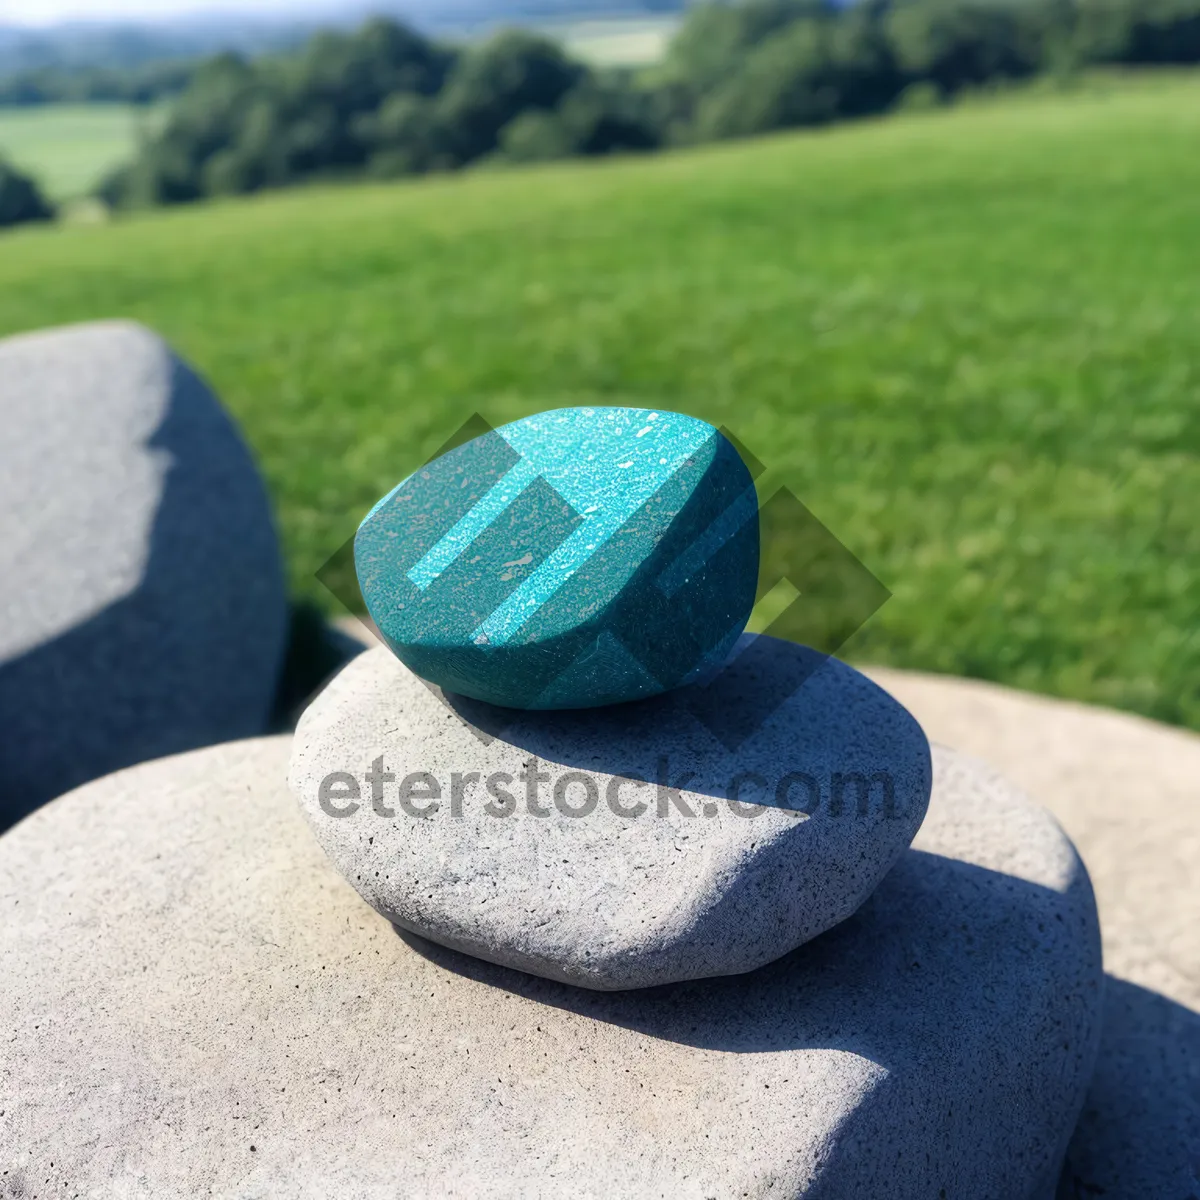 Picture of Tranquil Stone Stack: Harmony and Balance in Nature